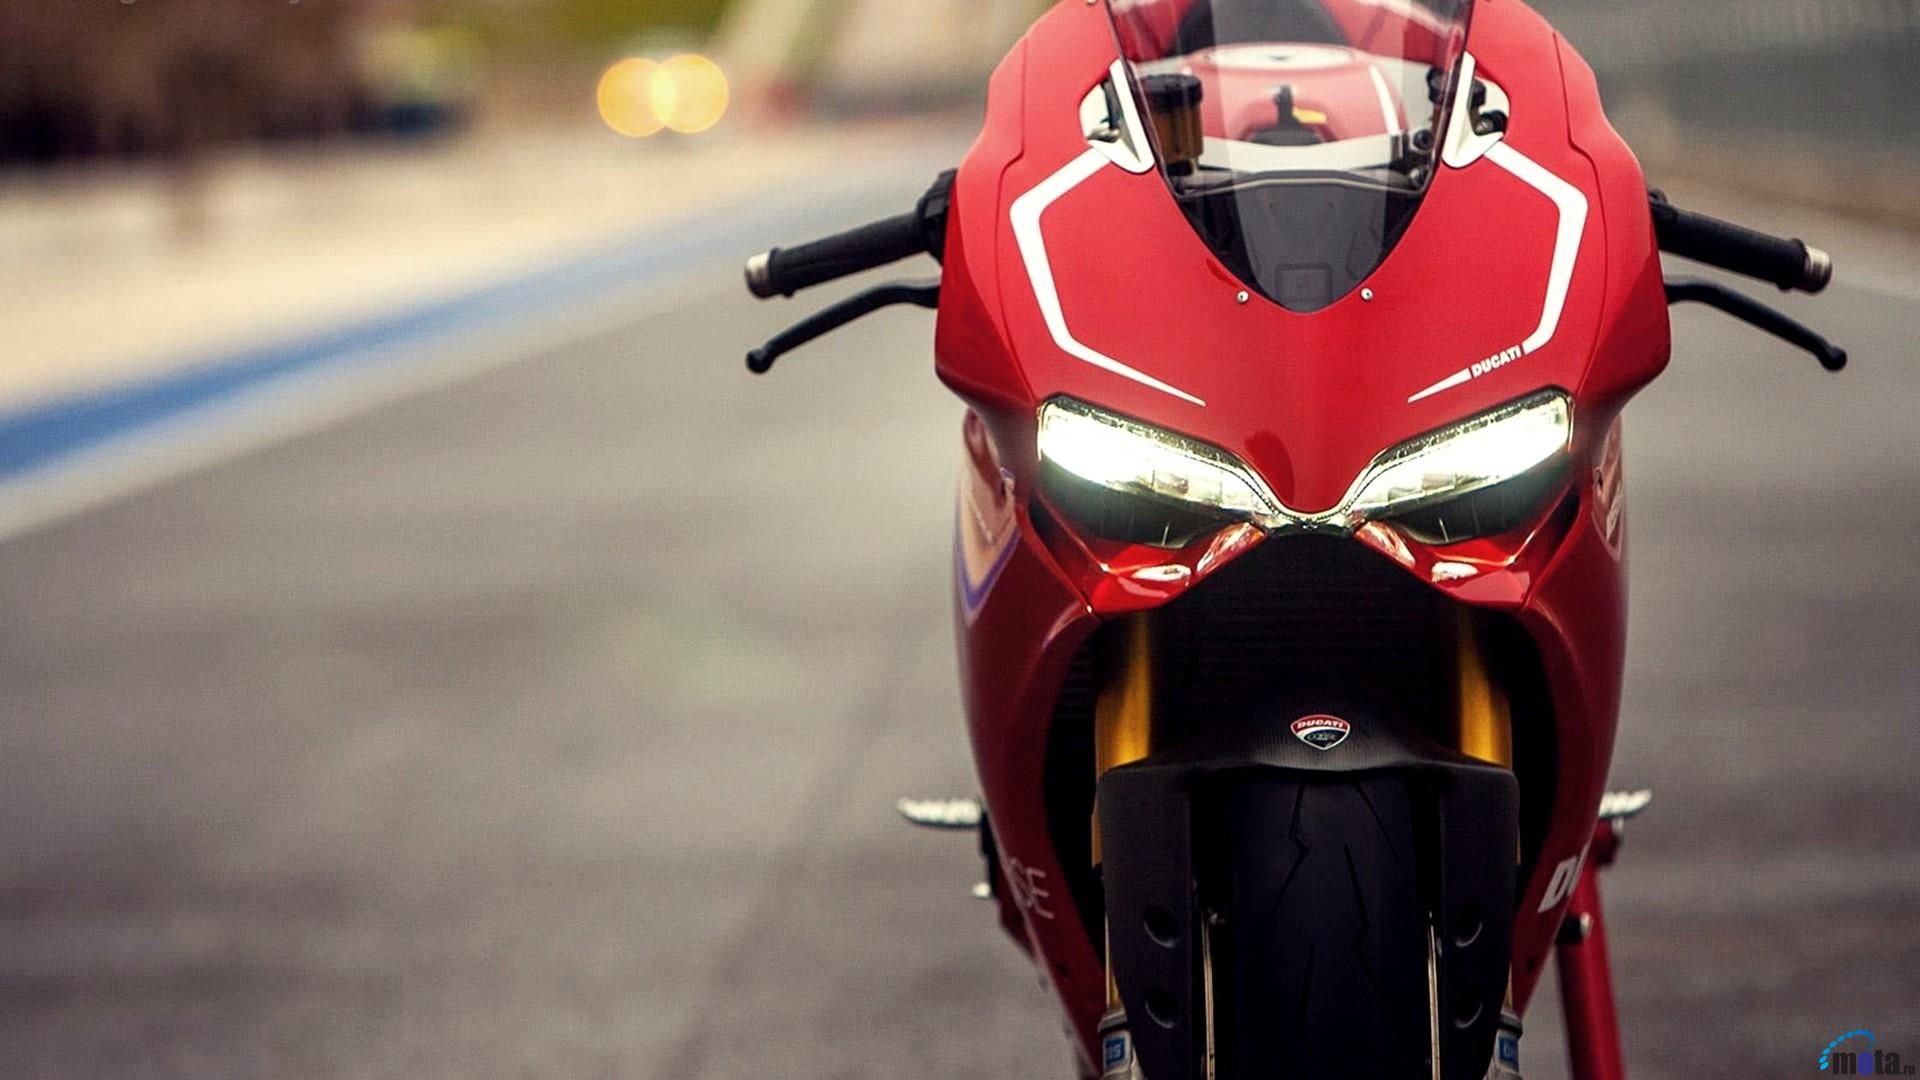 Download Wallpaper Red Ducati 1199 Panigale R (1920 x 1080 HDTV ...